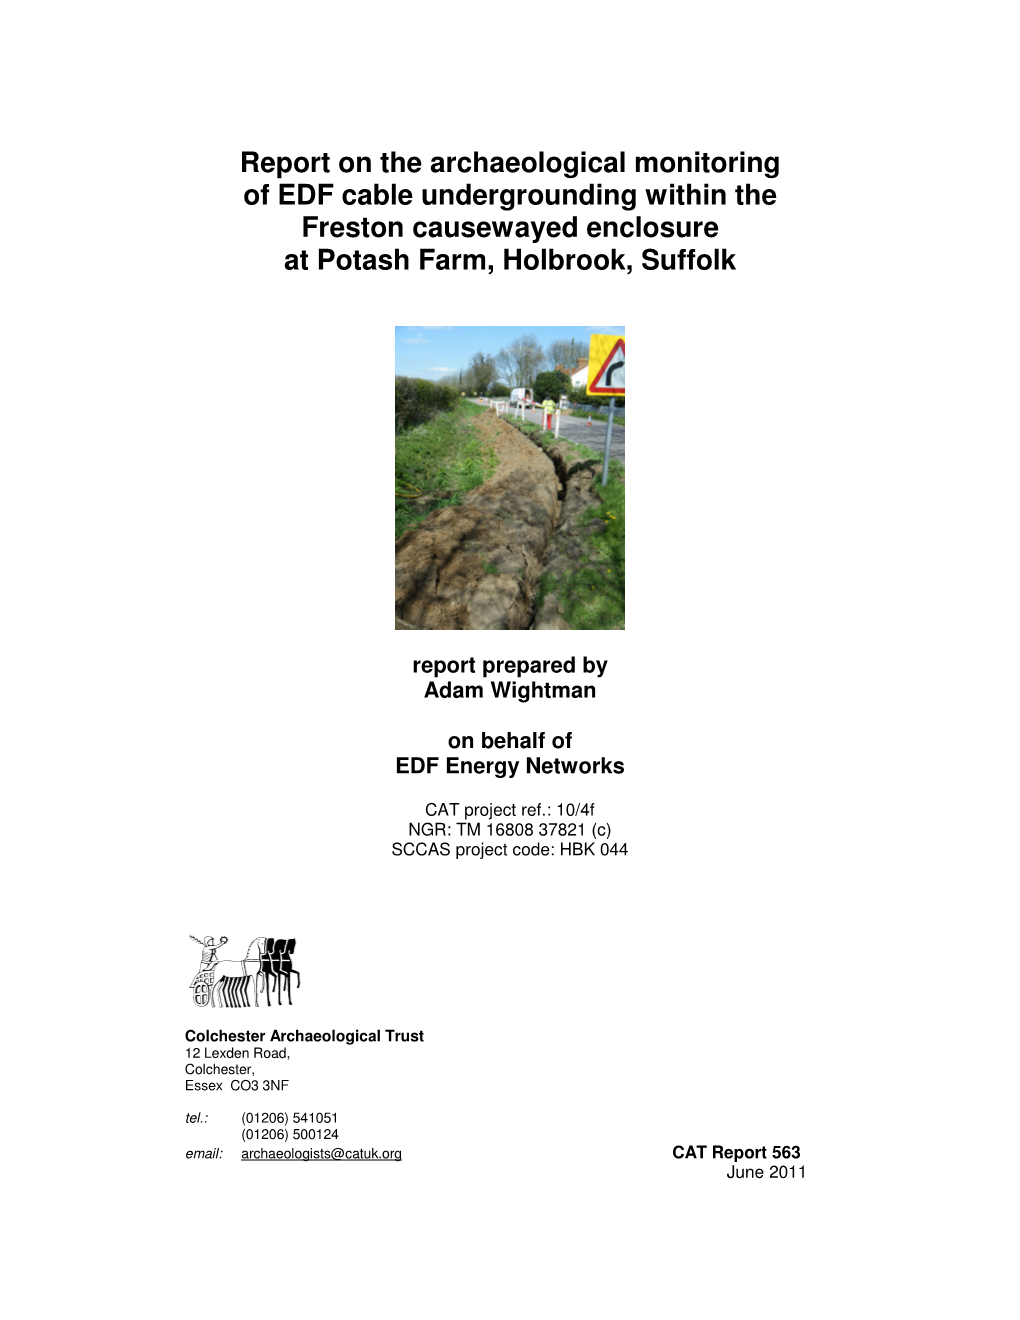 Report on the Archaeological Monitoring of EDF Cable Undergrounding Within the Freston Causewayed Enclosure at Potash Farm, Holbrook, Suffolk